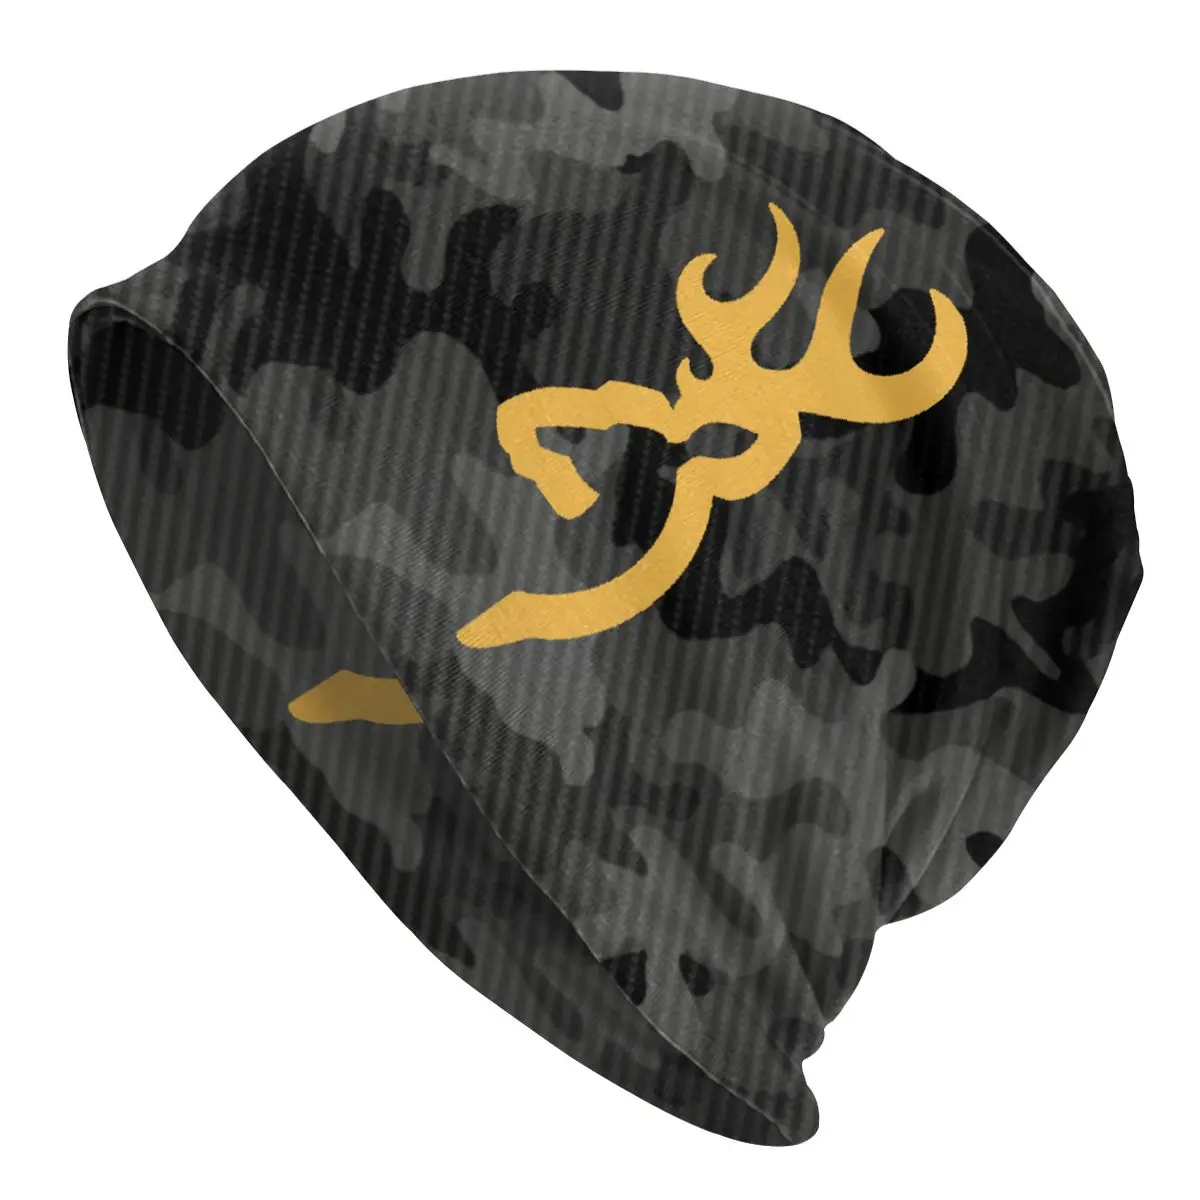 

Browning Military Army Camouflage Skullies Beanies Caps For Men Women Unisex Winter Warm Knitted Hat Adult Camo Bonnet Hats